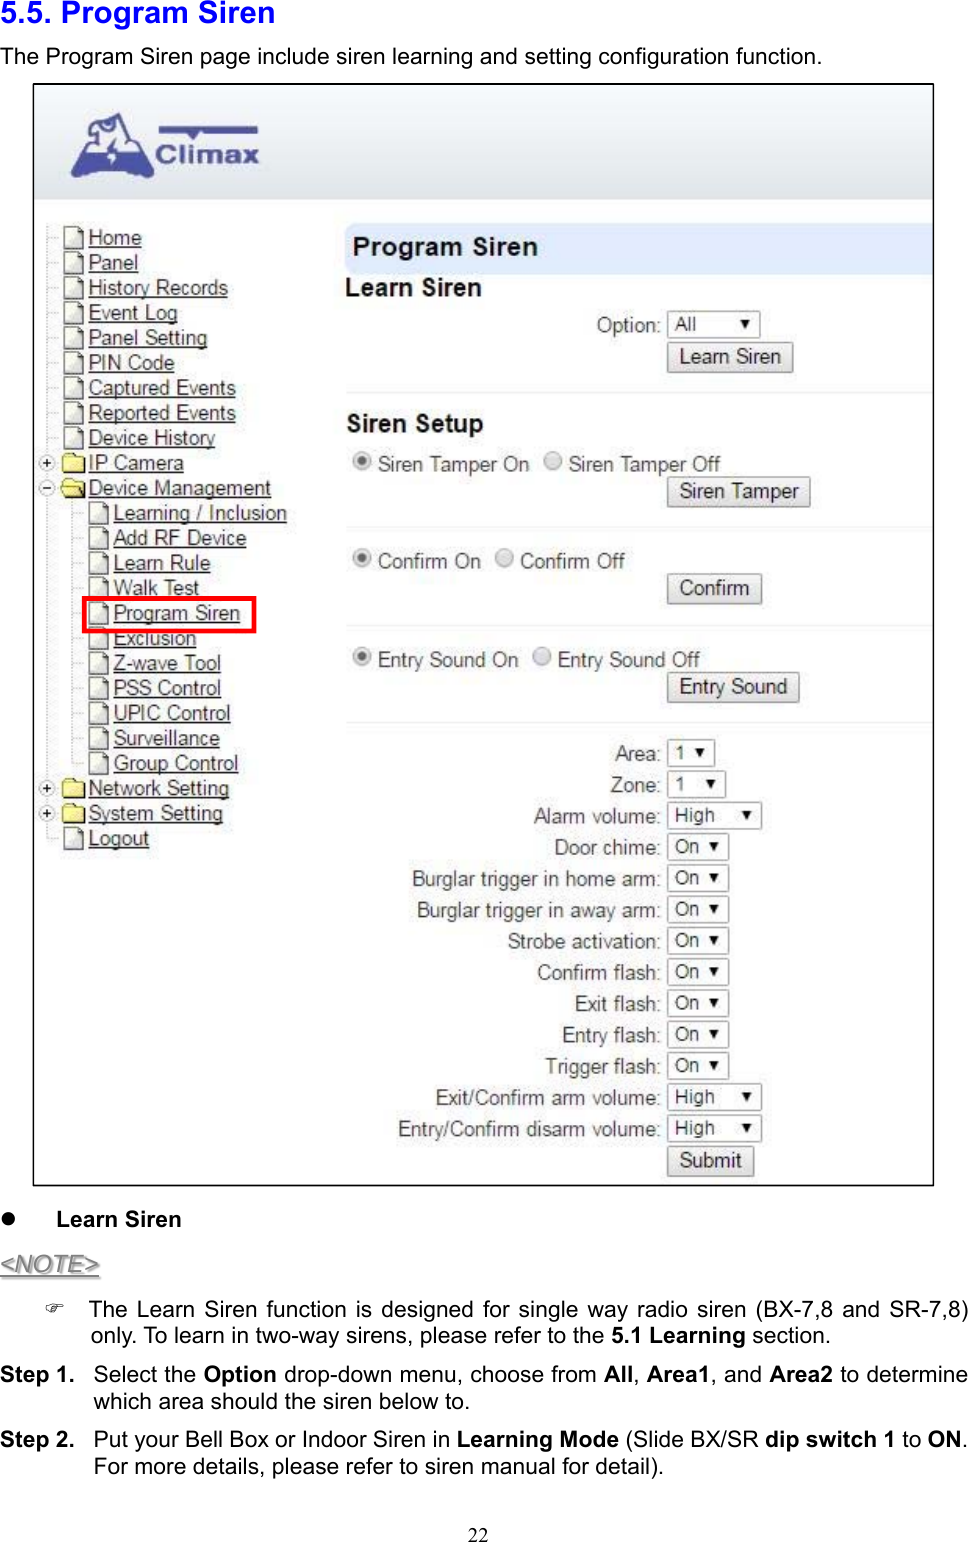  225.5. Program Siren   The Program Siren page include siren learning and setting configuration function.   Learn Siren &lt;NOTE&gt;   The Learn Siren  function is designed  for single way  radio  siren (BX-7,8 and  SR-7,8) only. To learn in two-way sirens, please refer to the 5.1 Learning section.   Step 1.  Select the Option drop-down menu, choose from All, Area1, and Area2 to determine which area should the siren below to. Step 2.  Put your Bell Box or Indoor Siren in Learning Mode (Slide BX/SR dip switch 1 to ON. For more details, please refer to siren manual for detail).   